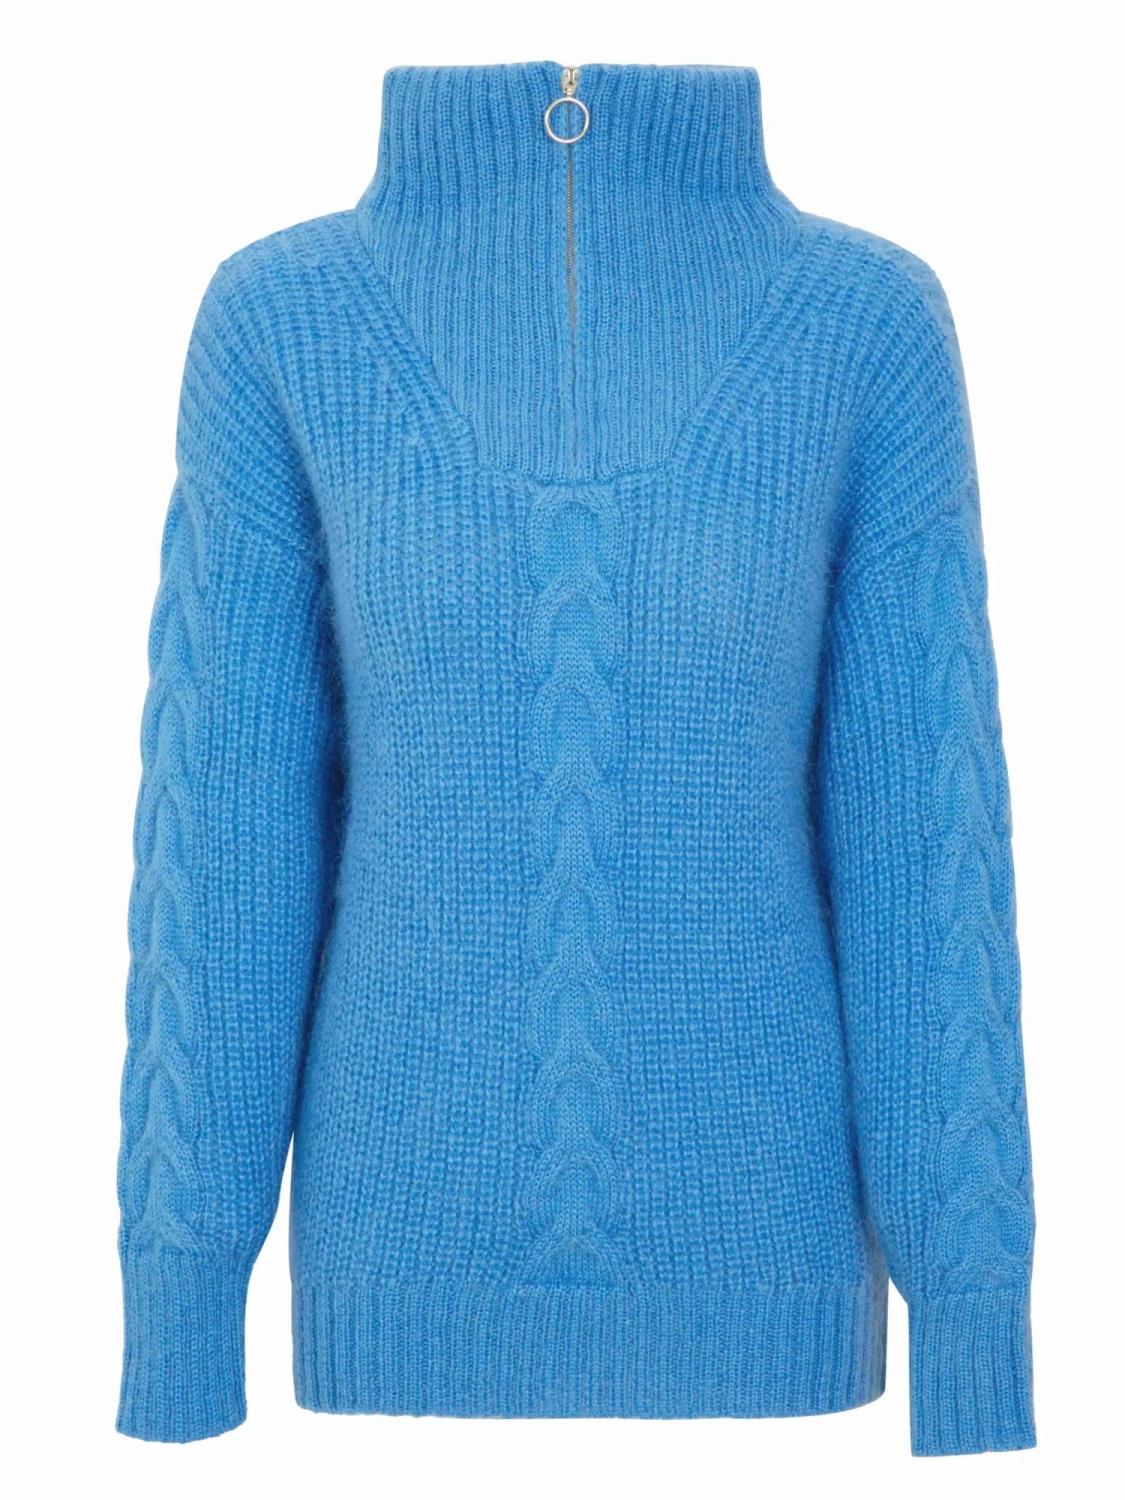 WoolLand  Olden knitted sweater Woman